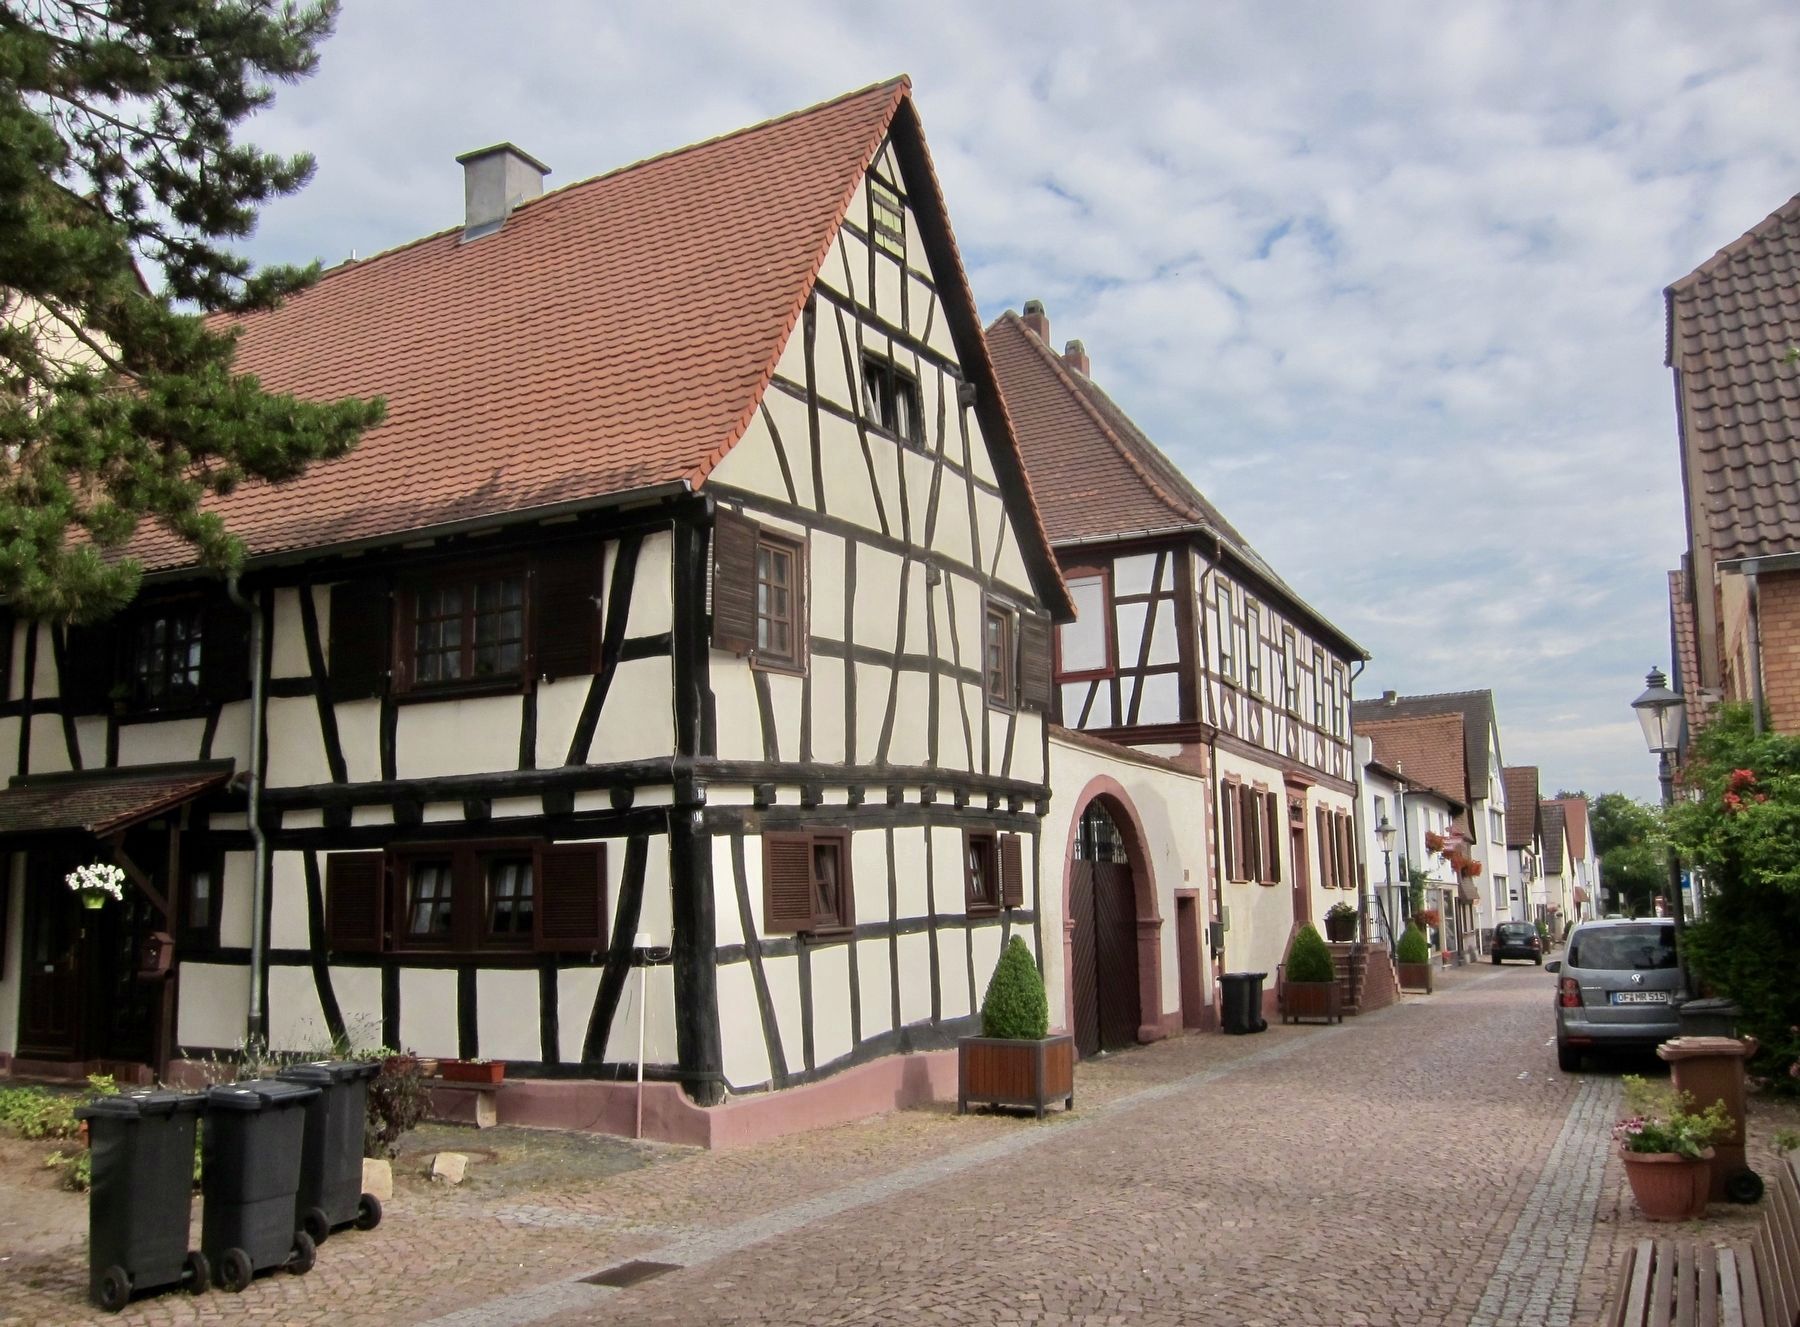 Ehemaliges Kellergebude und Zehnthaus / Former Ware- and Tithing House Marker - Wide View image. Click for full size.